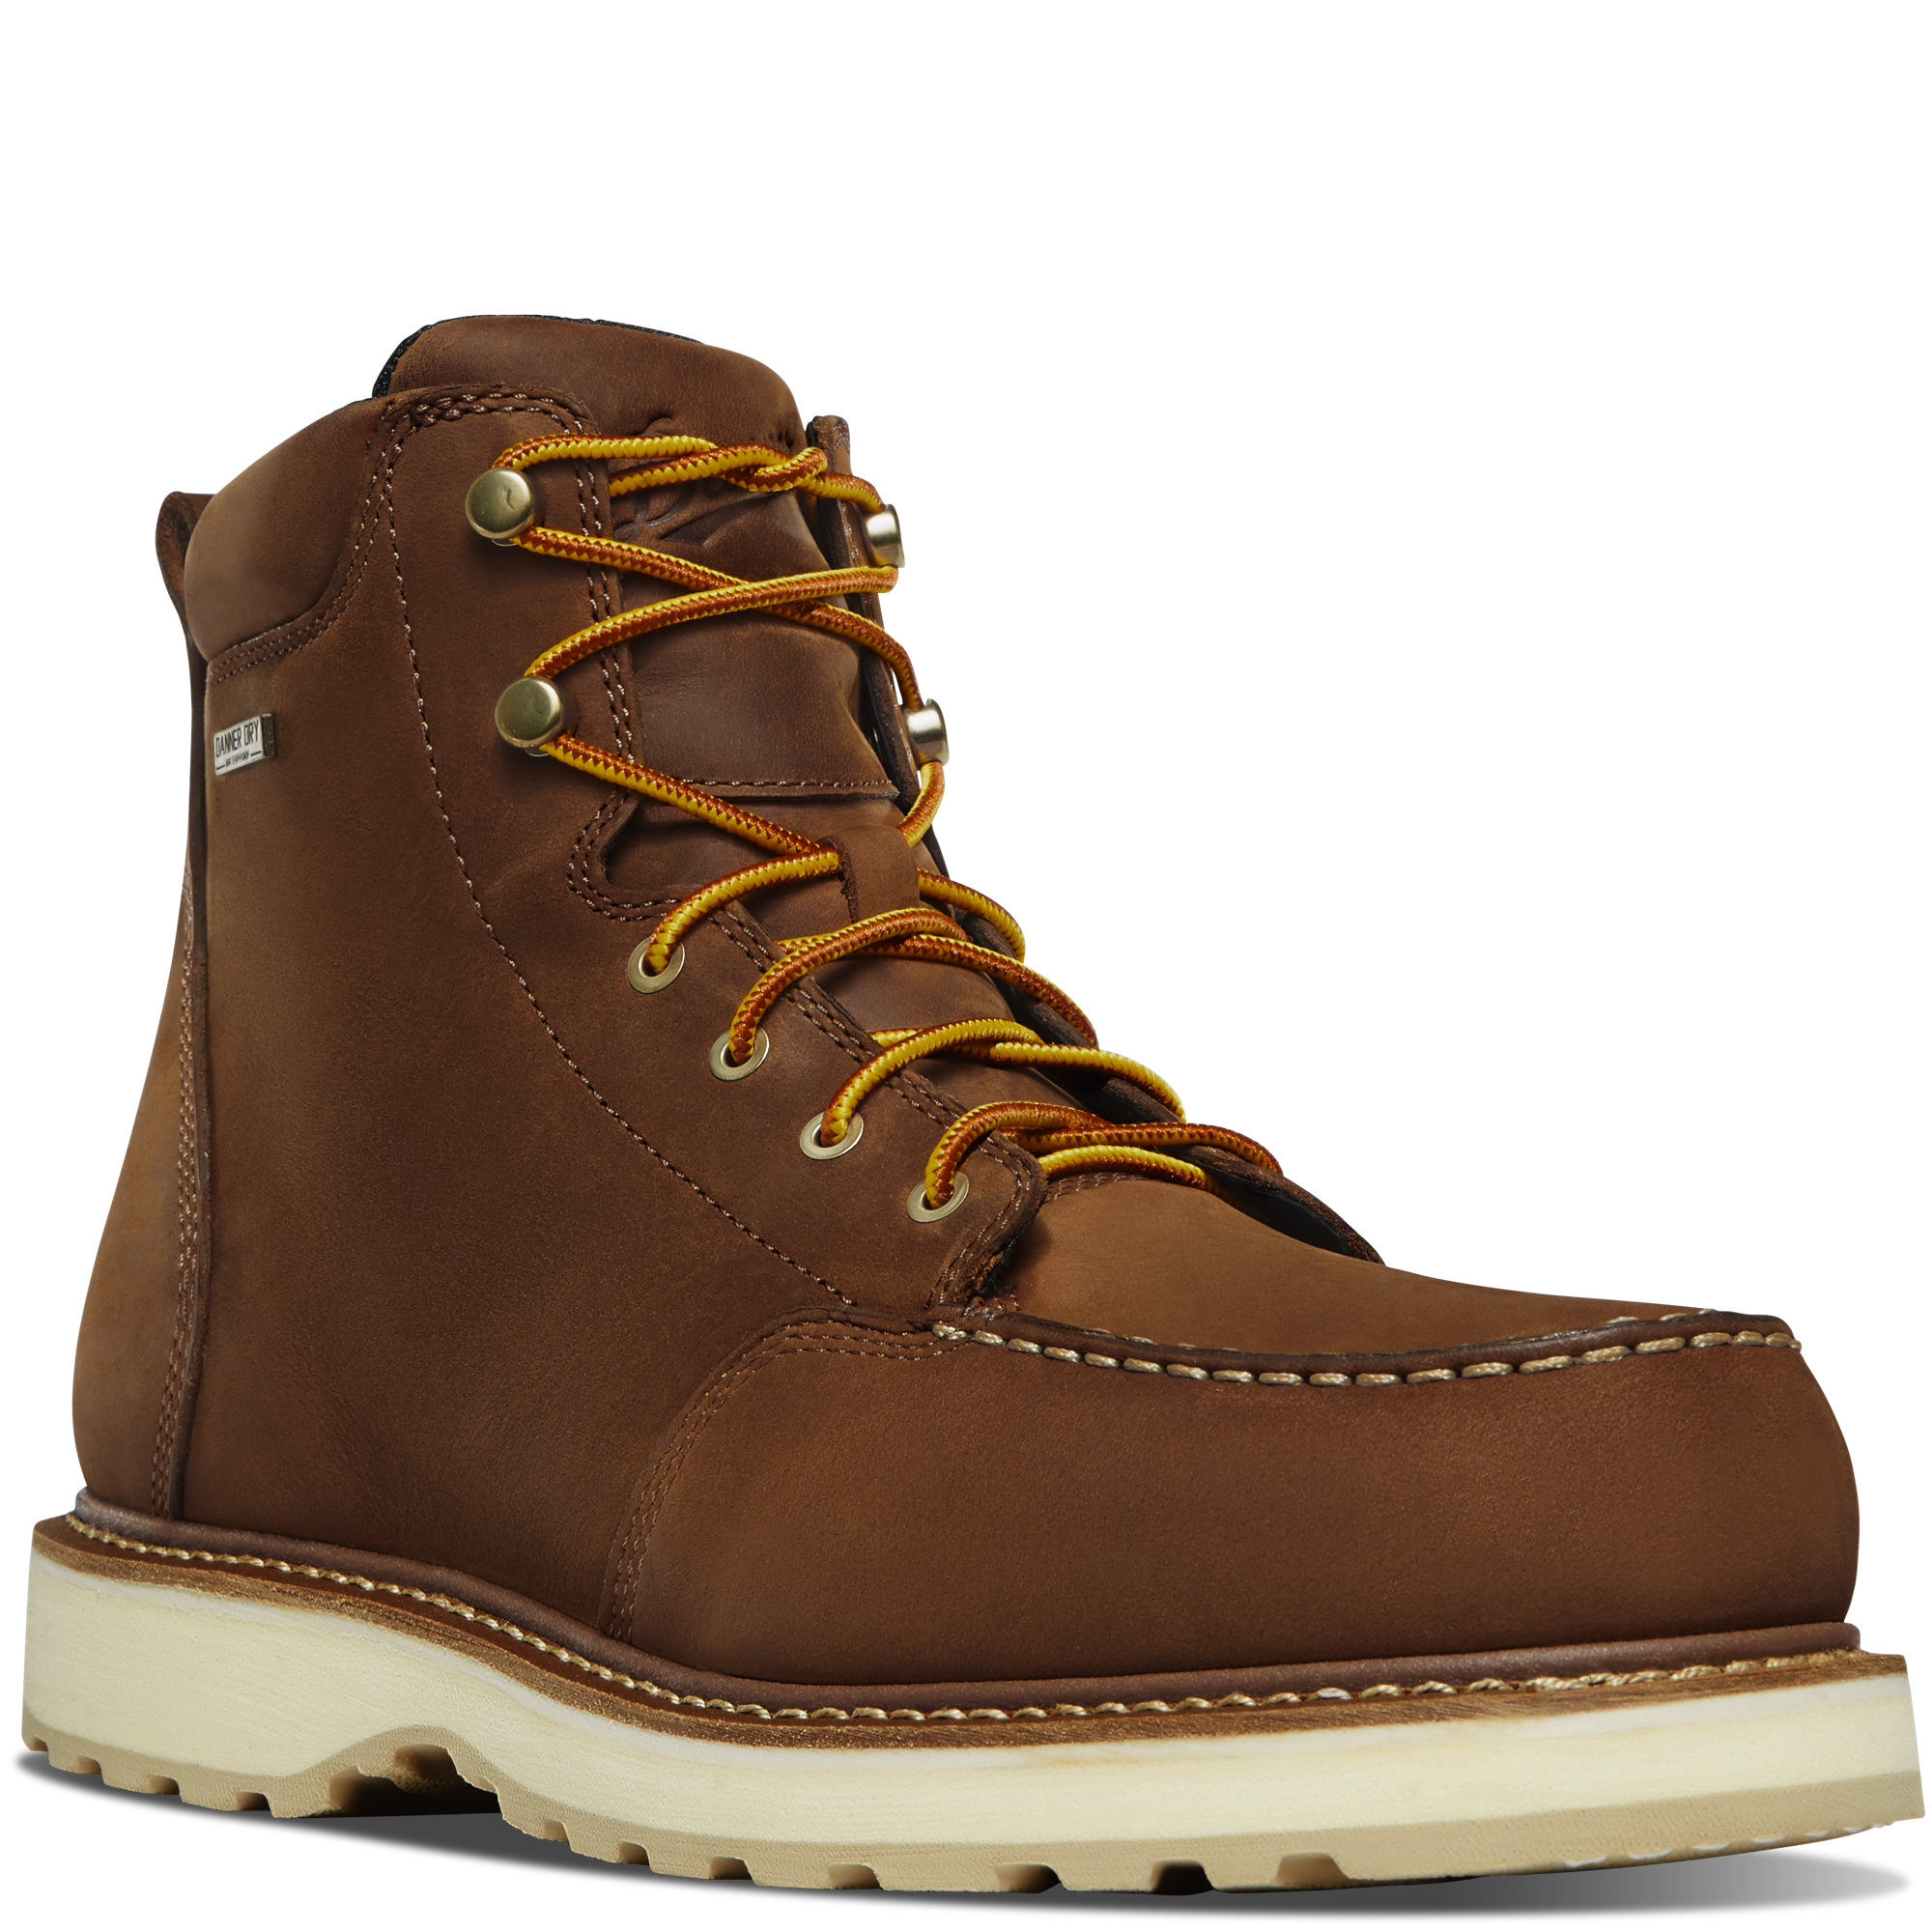 LaCrosse Men's Cedar River 6 Inch Work Boots with Aluminum Toe from GME Supply